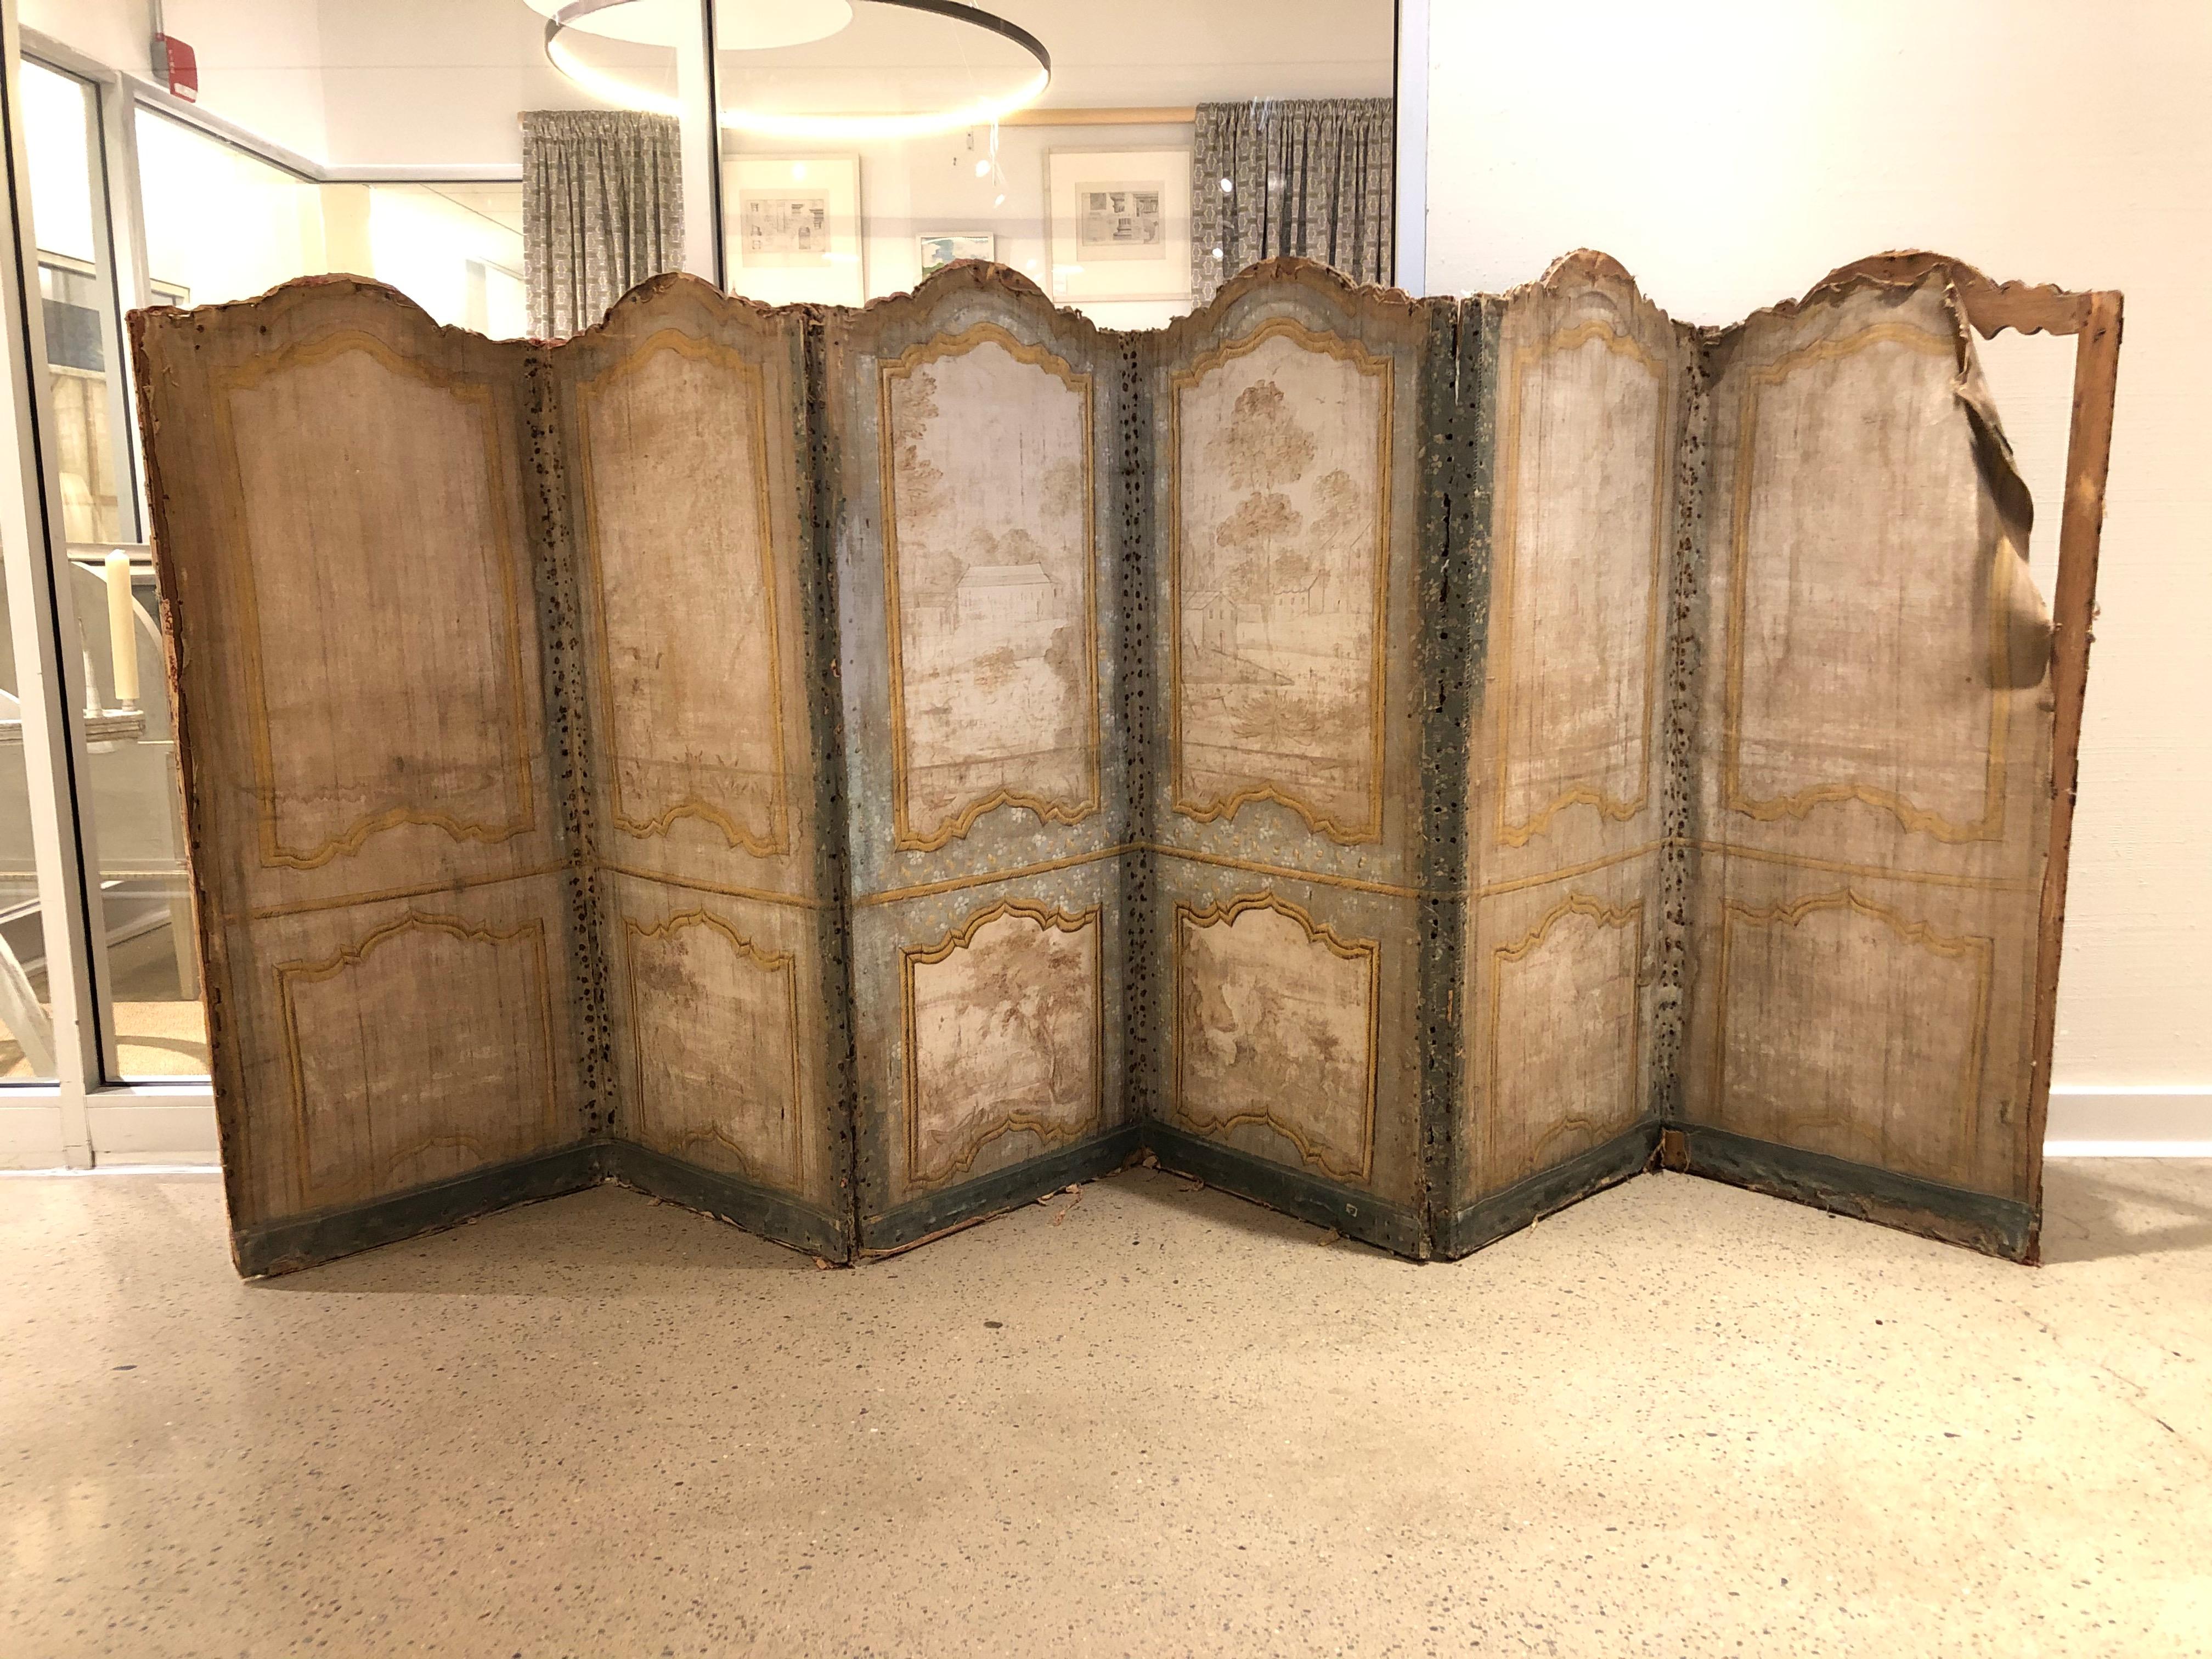 18th century French six-panel painted folding screen
(Each panel is 25